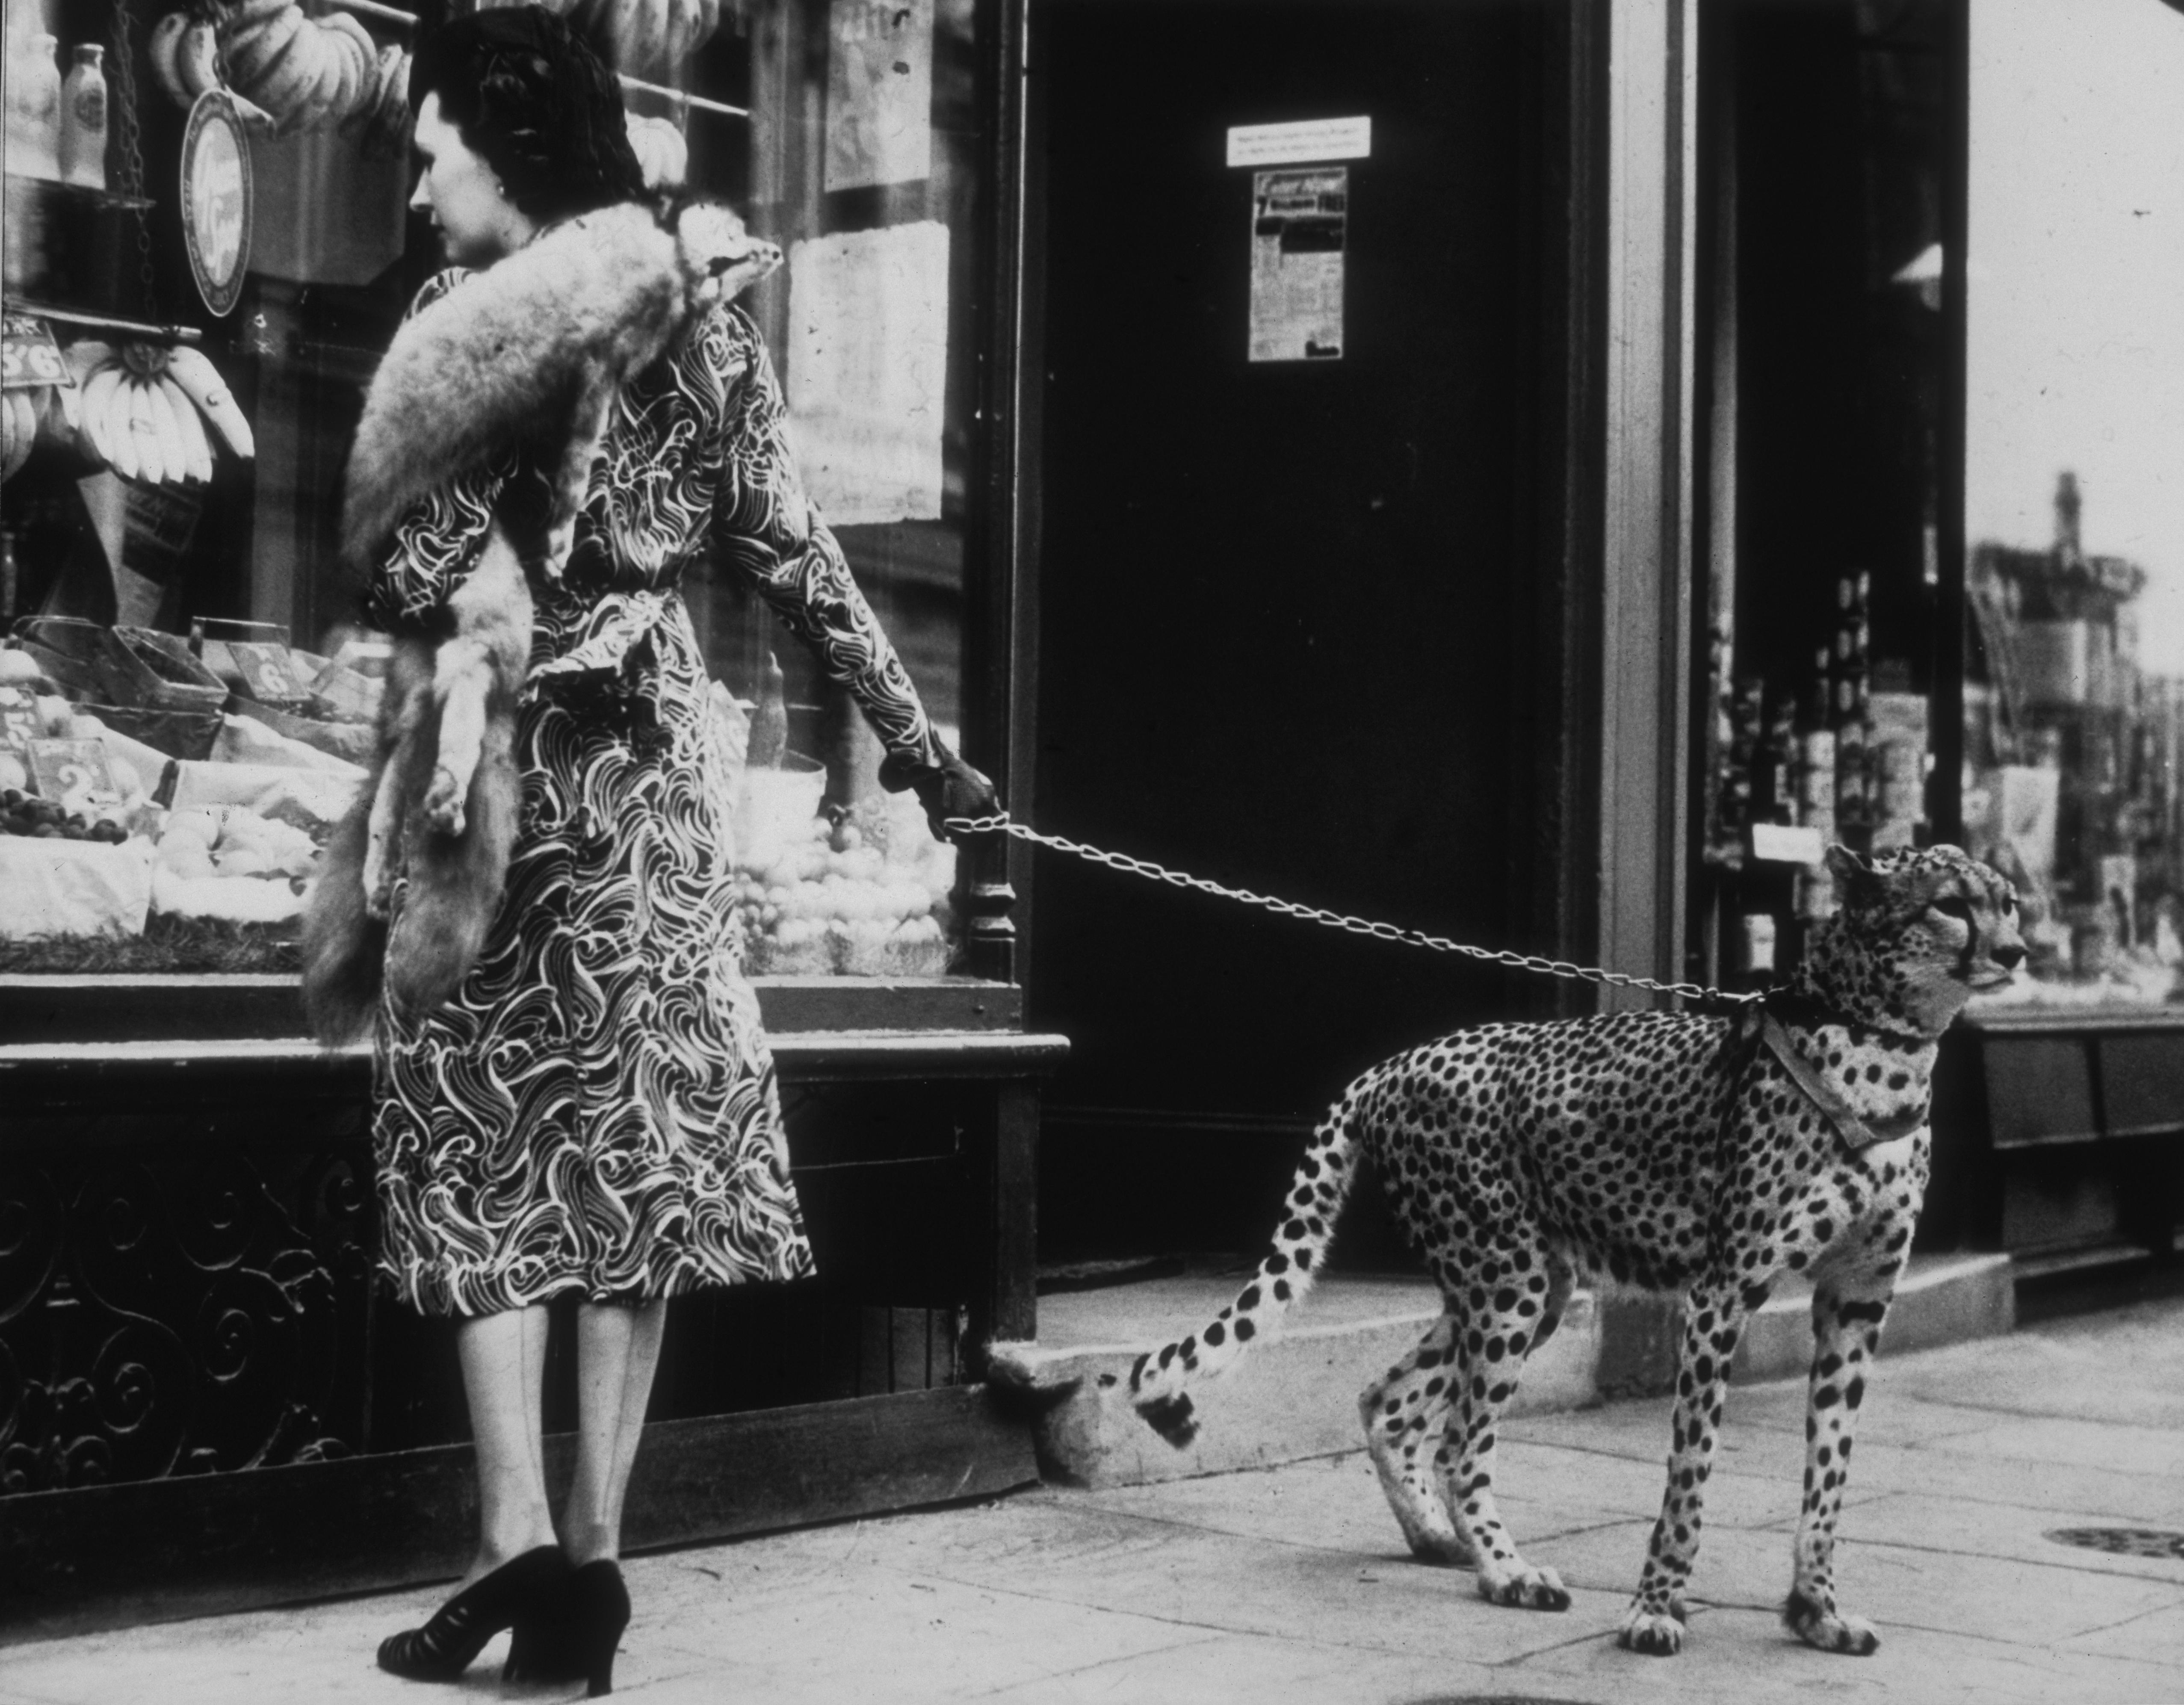 Unknown Black and White Photograph - 'Cheetah Who Shops' Limited Edition Photographic Print by Getty, 30x40